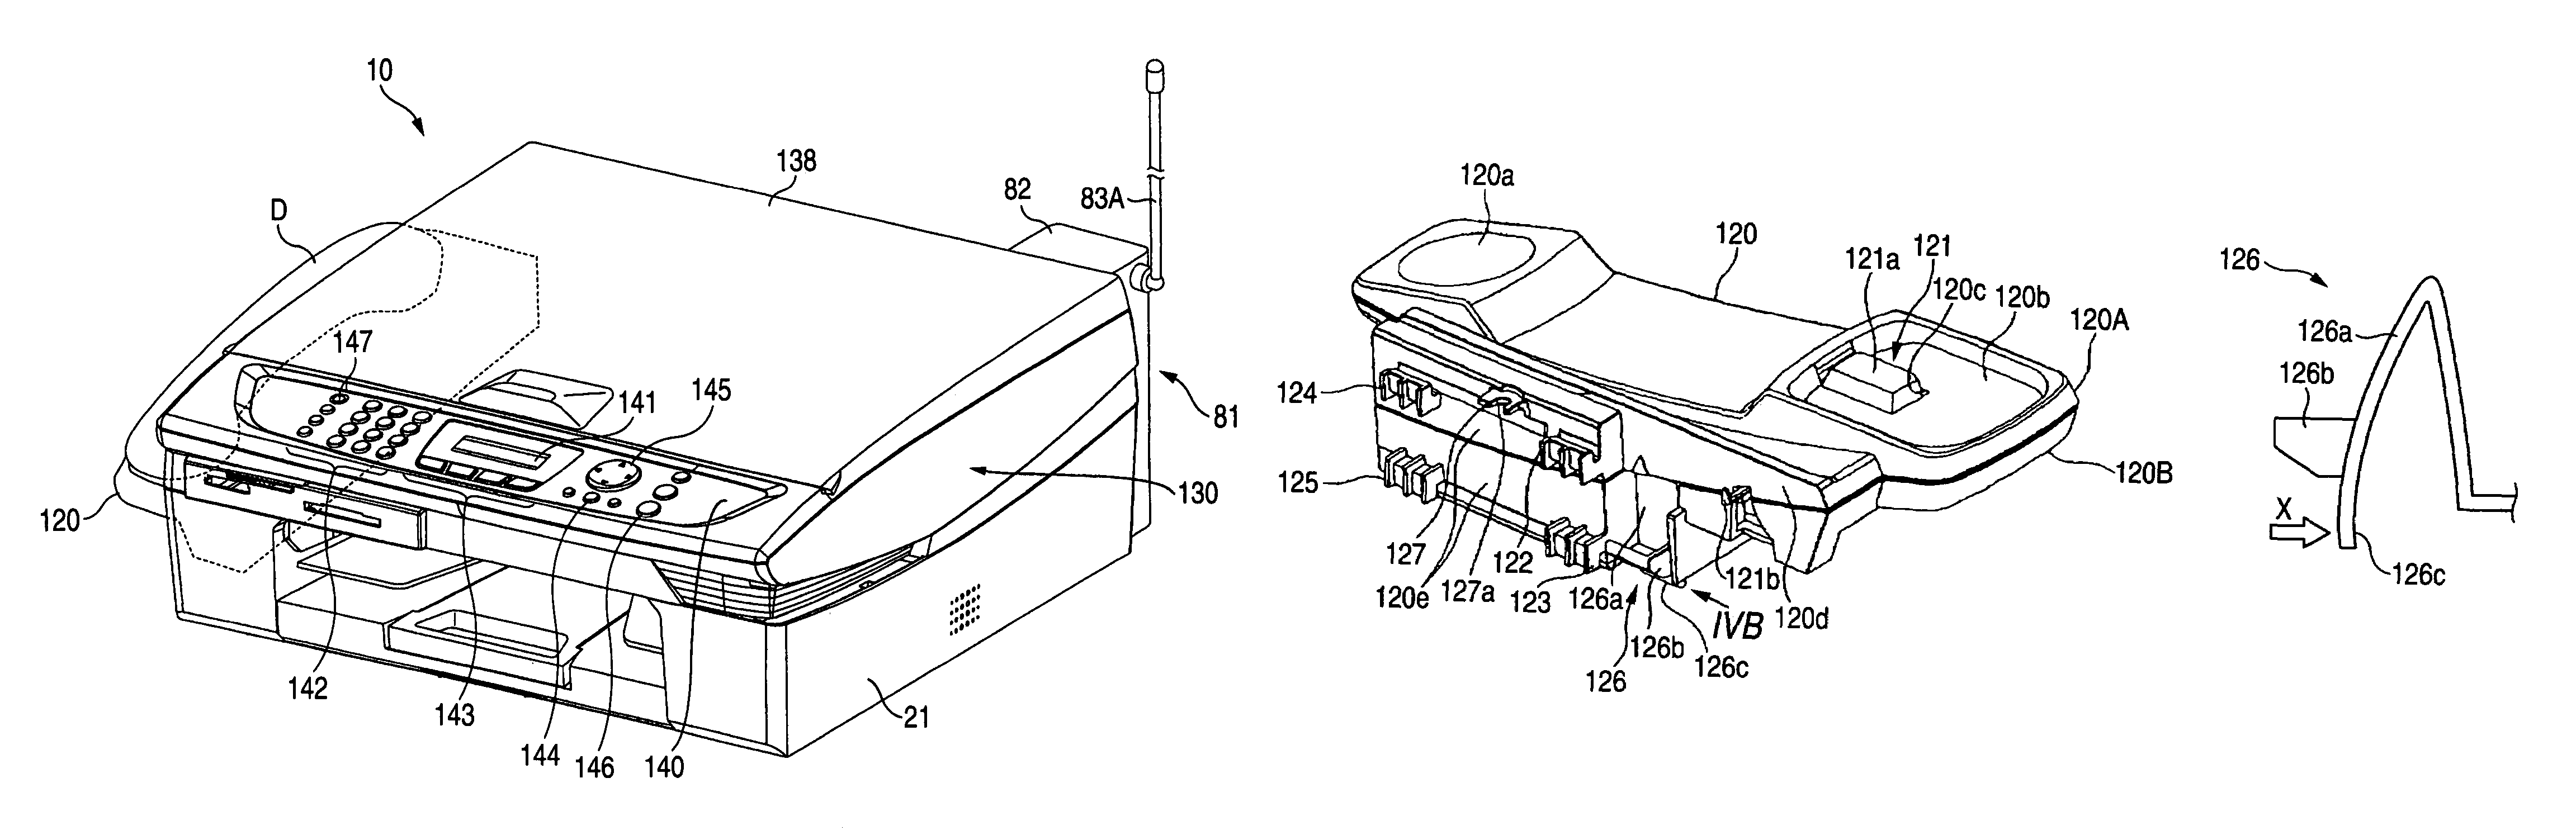 Holder and communication apparatus